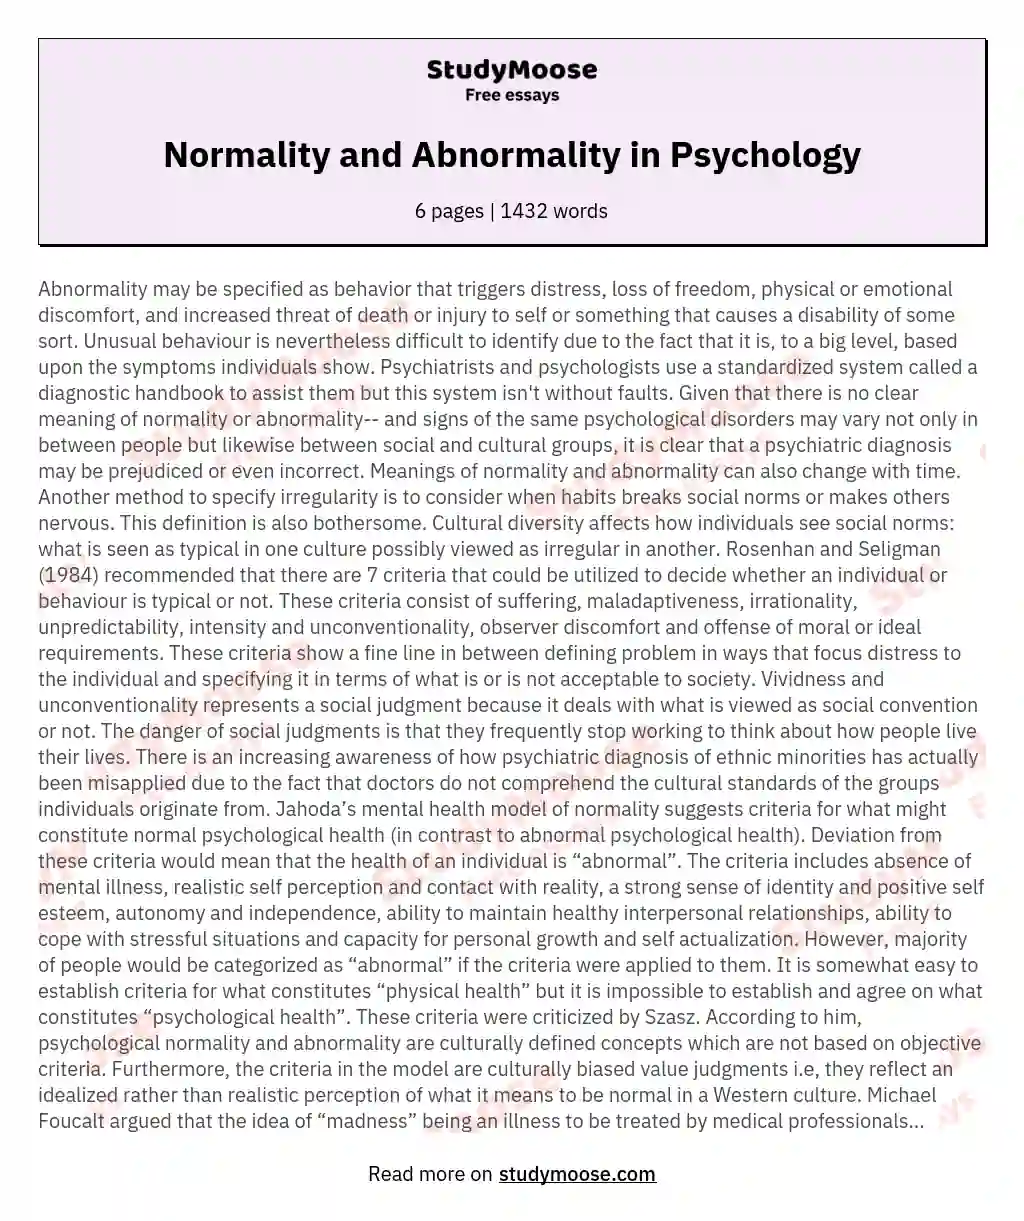 Normality and Abnormality in Psychology essay